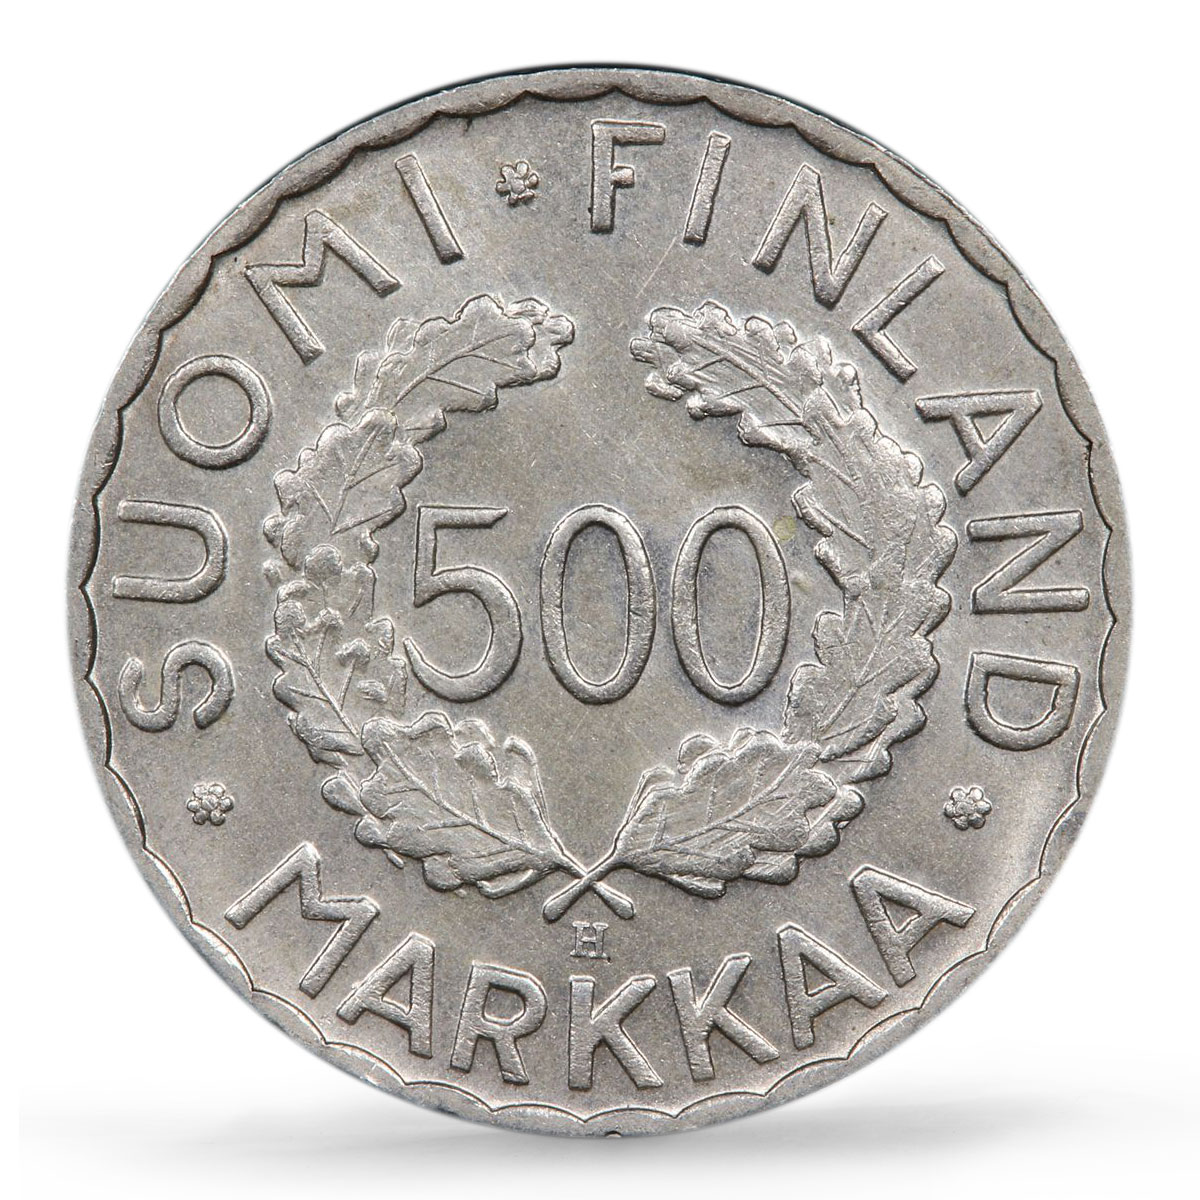 Finland 500 markaa Helsinki Winter Olympic Games KM-35 MS65 PCGS Ag coin 1951